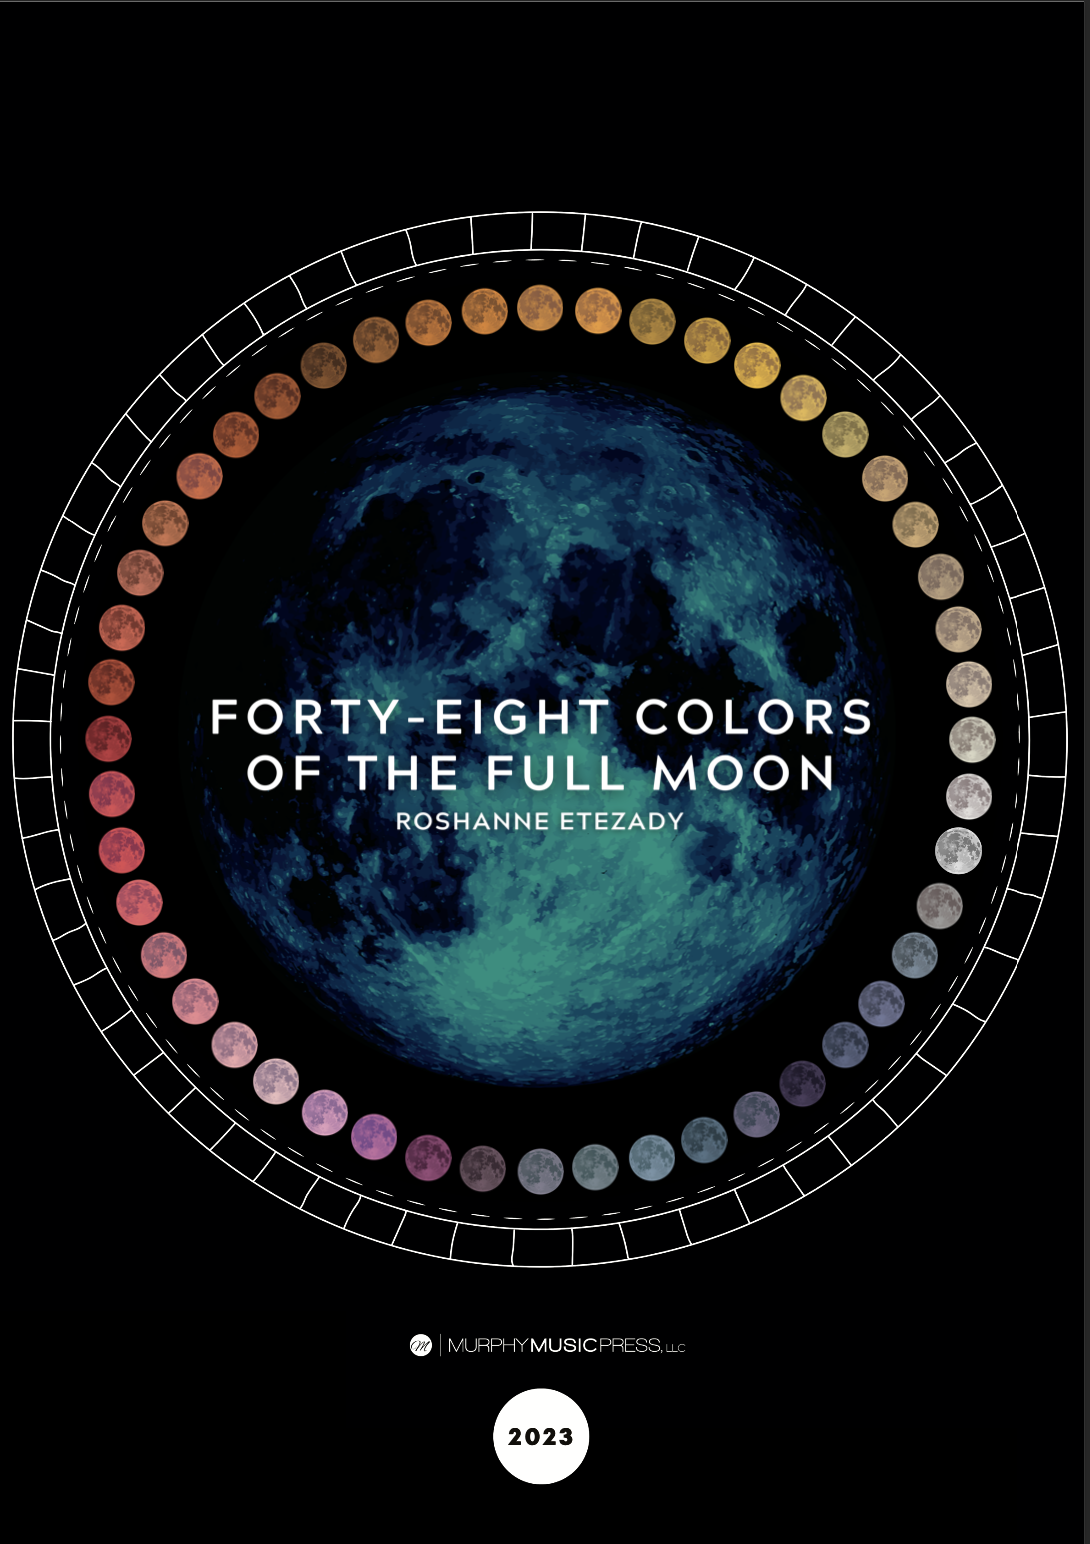 Forty-Eight Colors Of The Full Moon by Roshanne Etezady